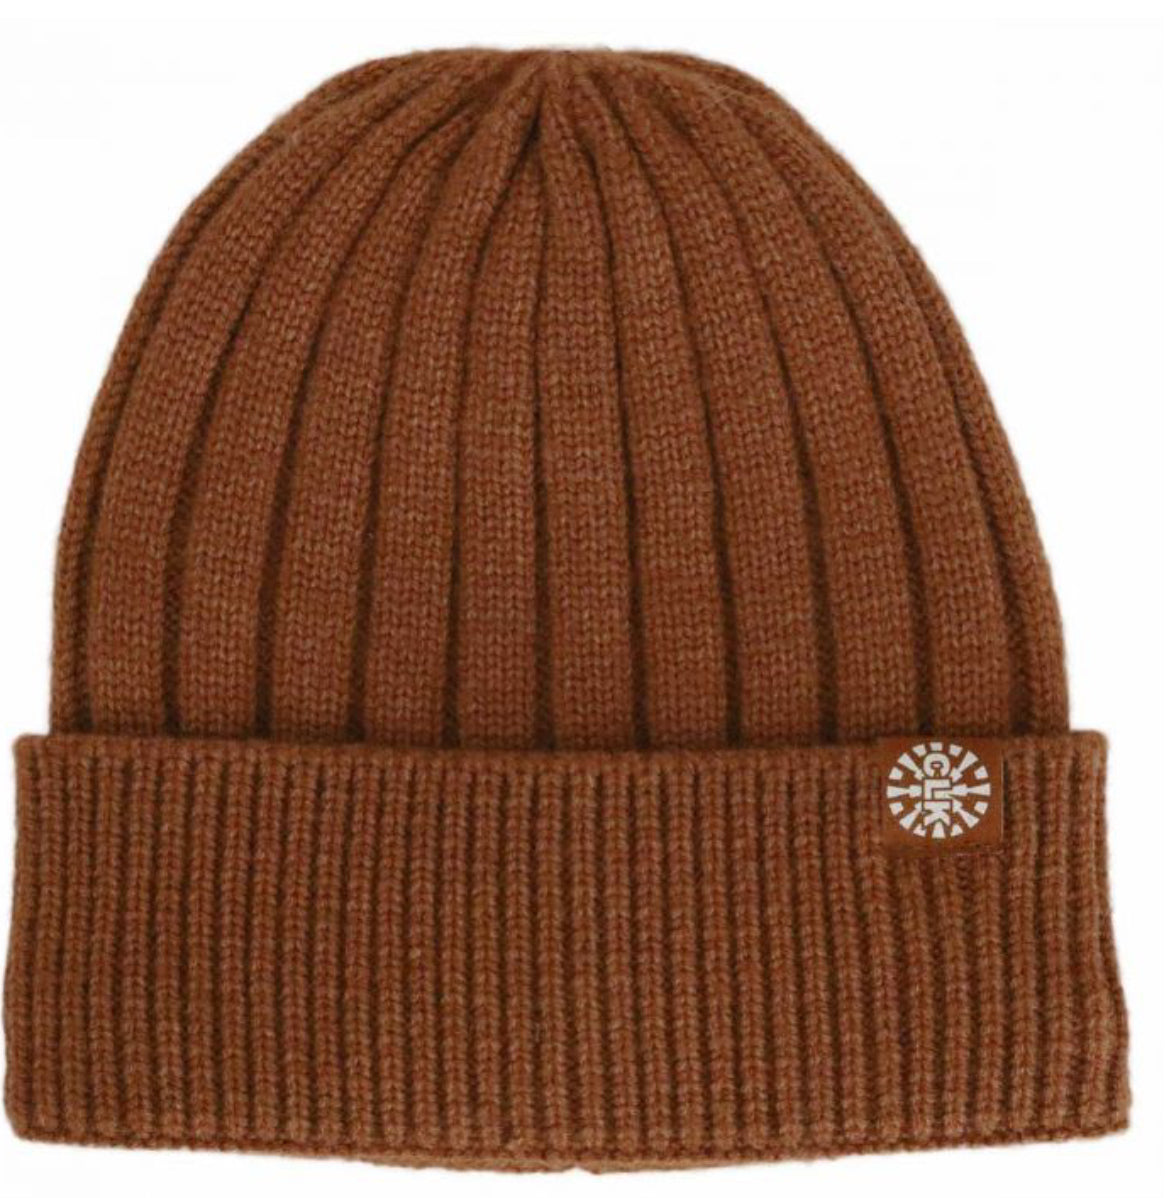 Unisex Knit Cashmere Touch Winter Hat Calikids